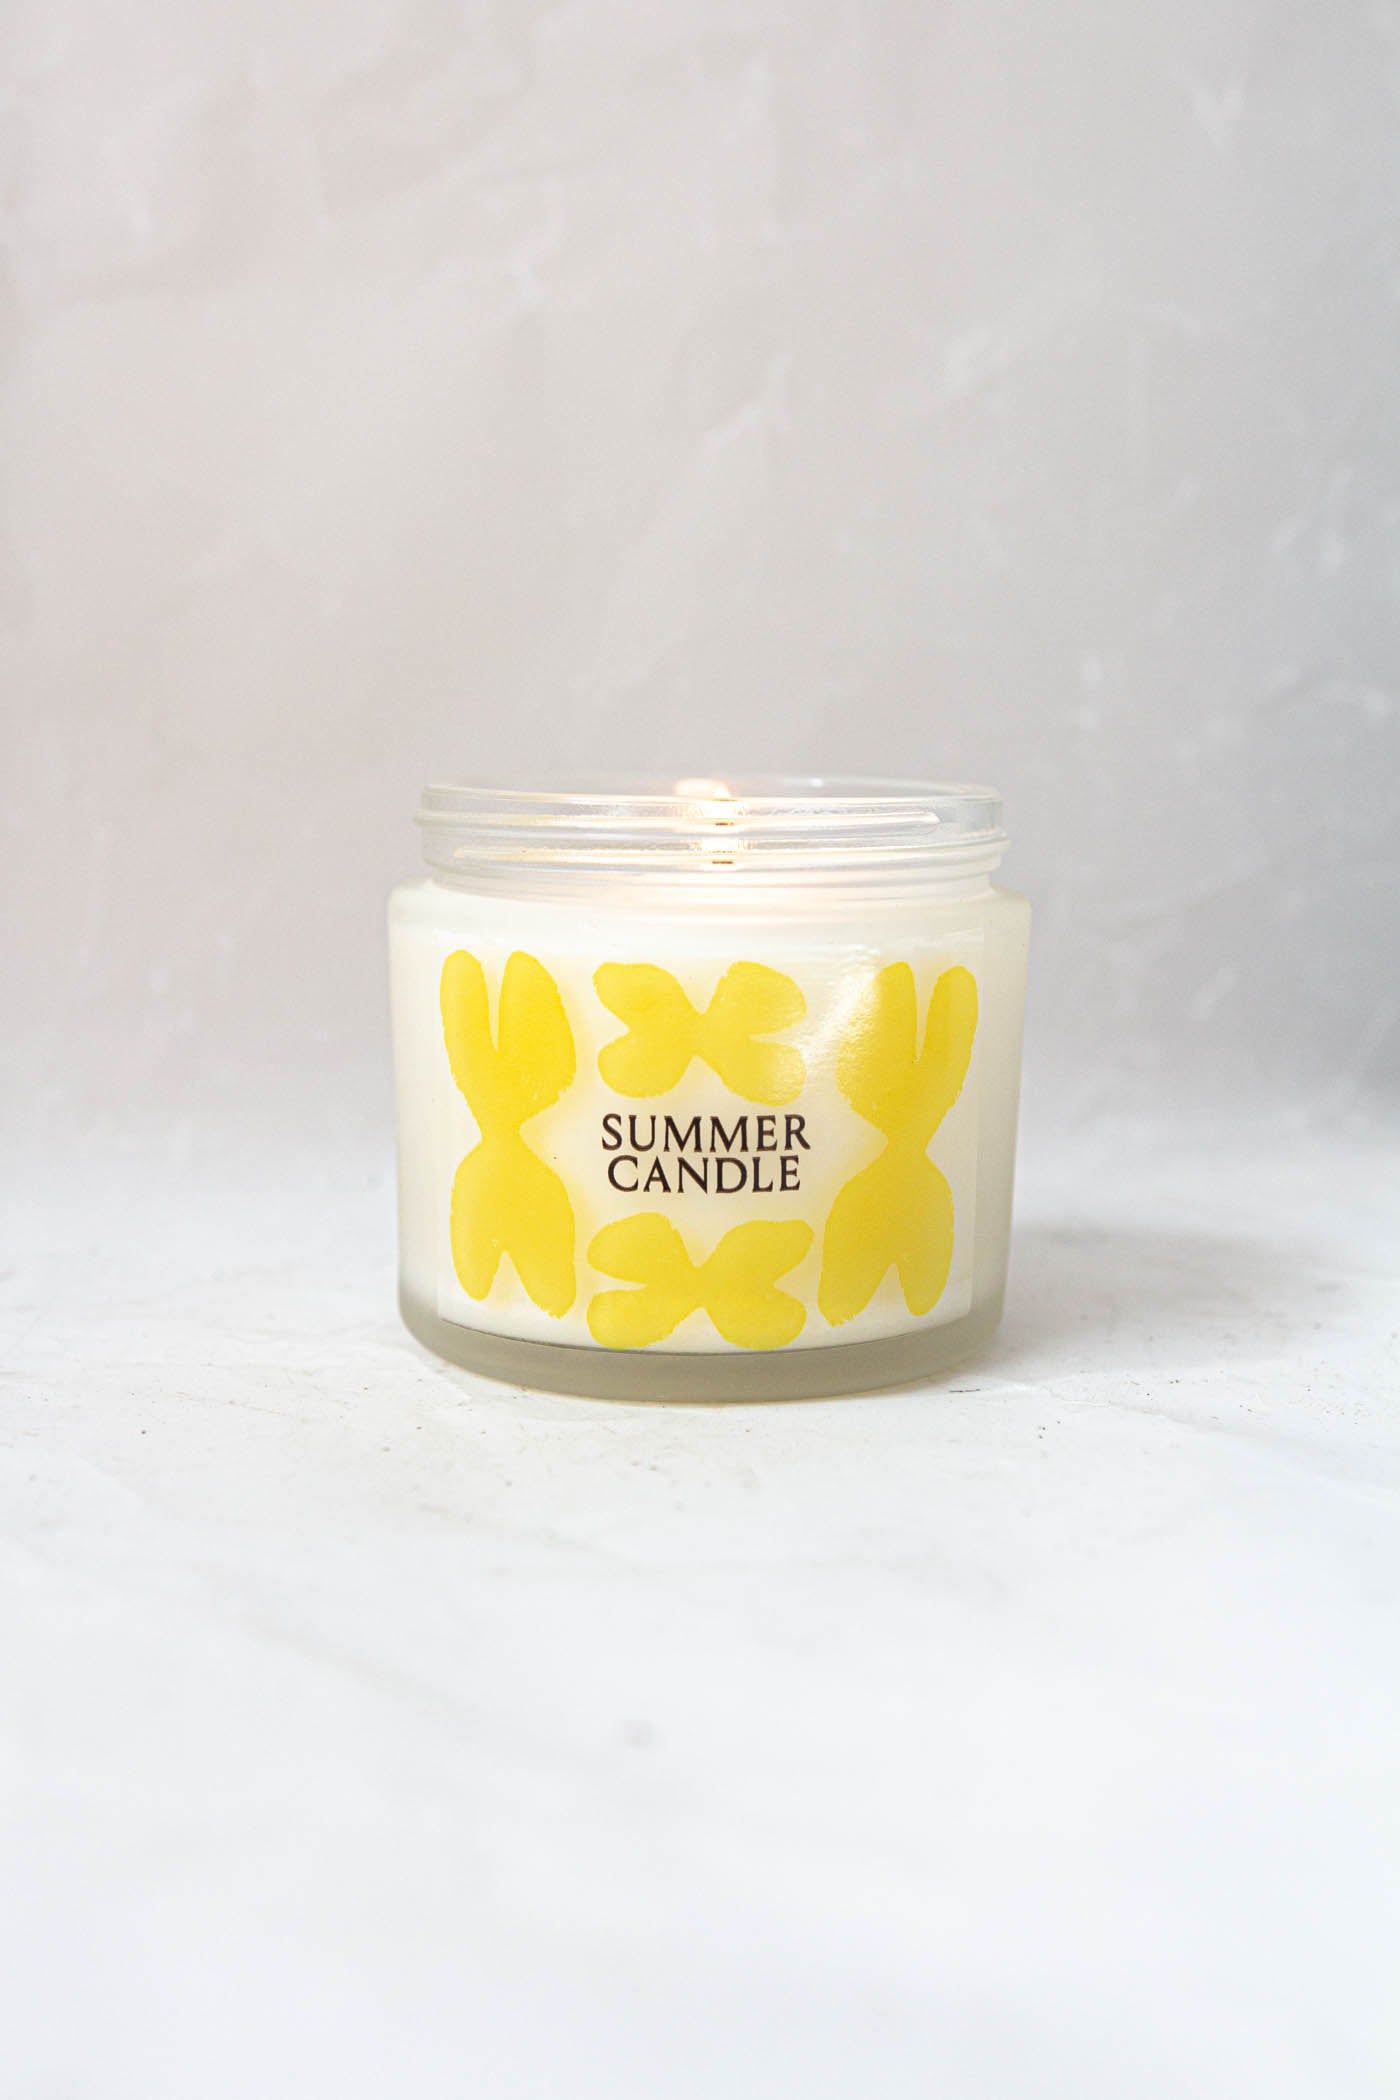 The Summer Candle